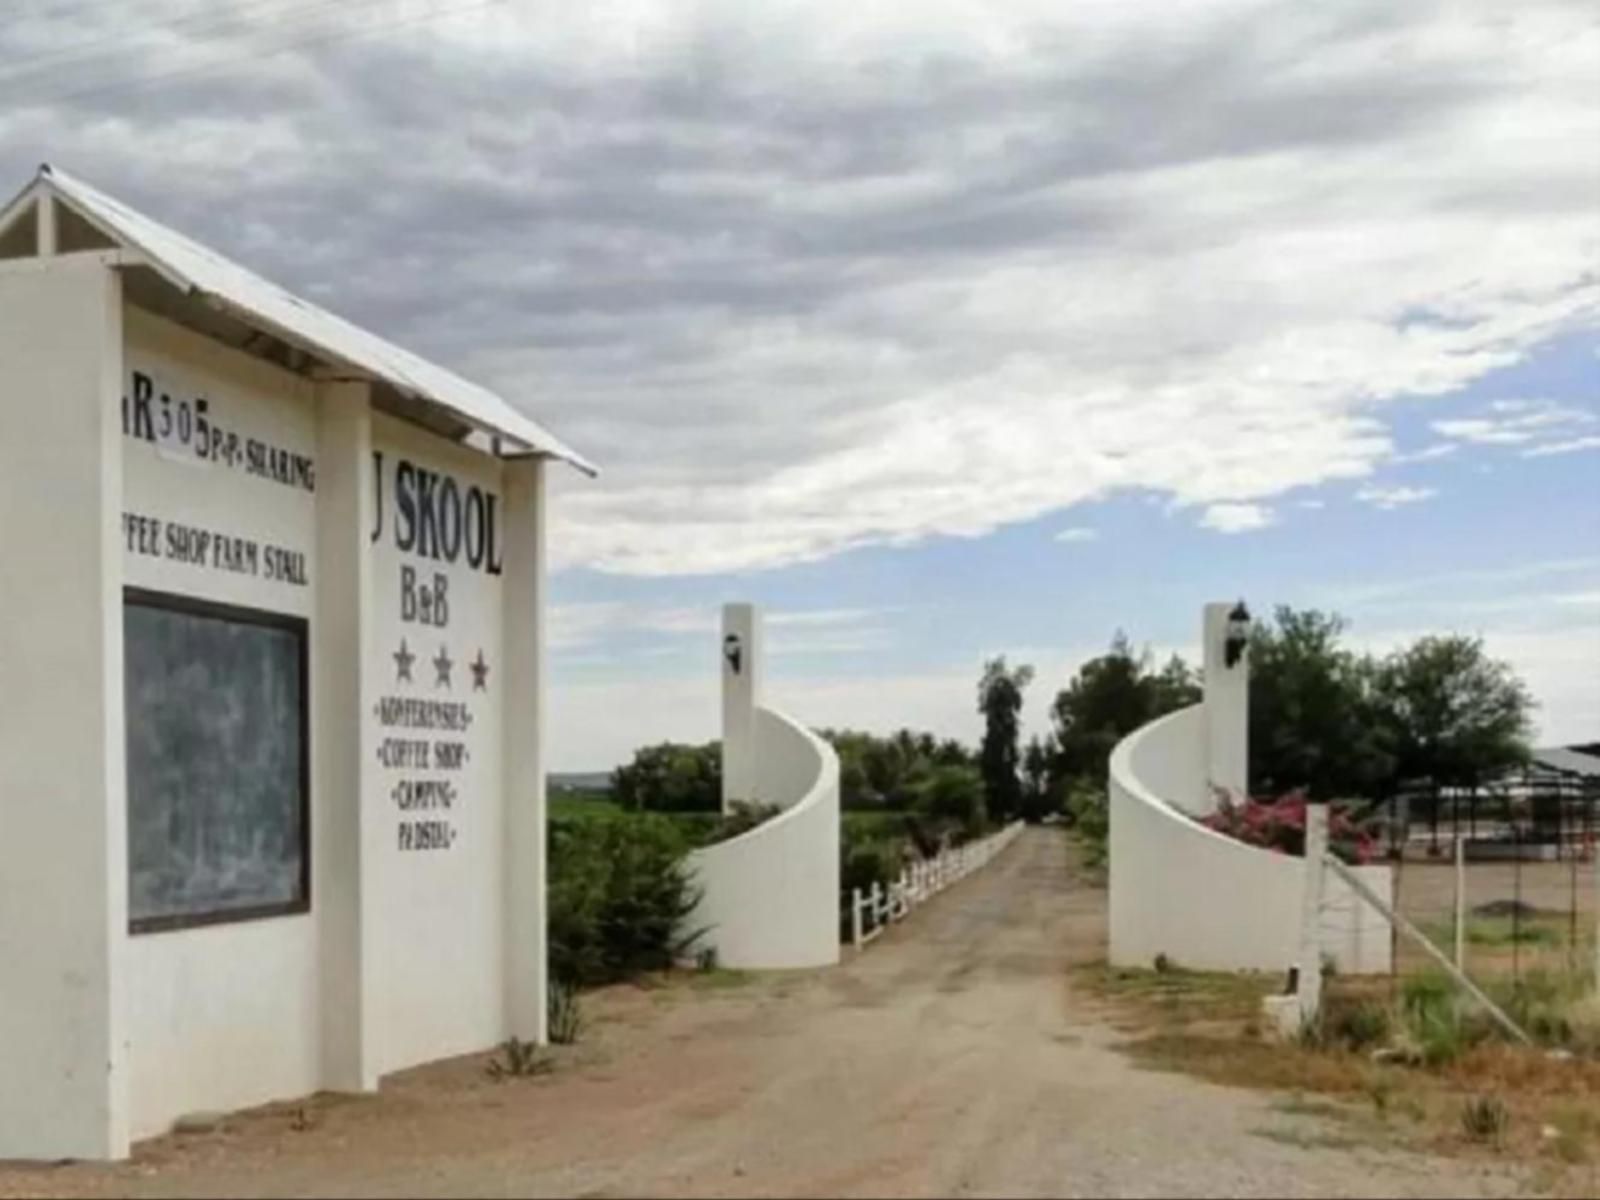 Ou Skool Guesthouse Keimoes Northern Cape South Africa Sign